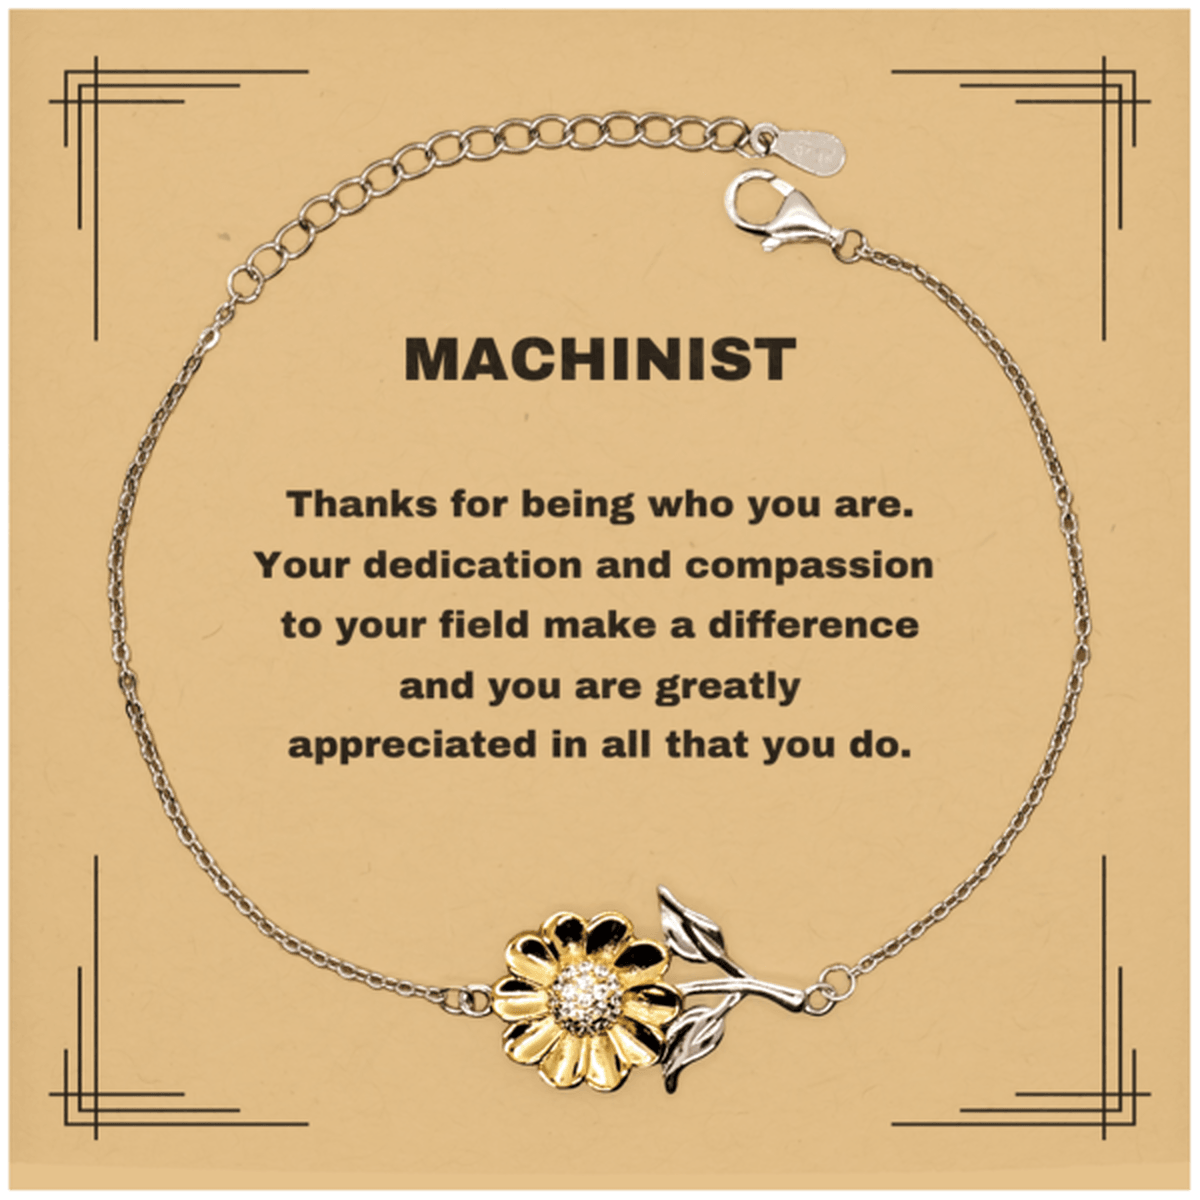 Machinist Sunflower Bracelet - Thanks for being who you are - Birthday Christmas Jewelry Gifts Coworkers Colleague Boss - Mallard Moon Gift Shop